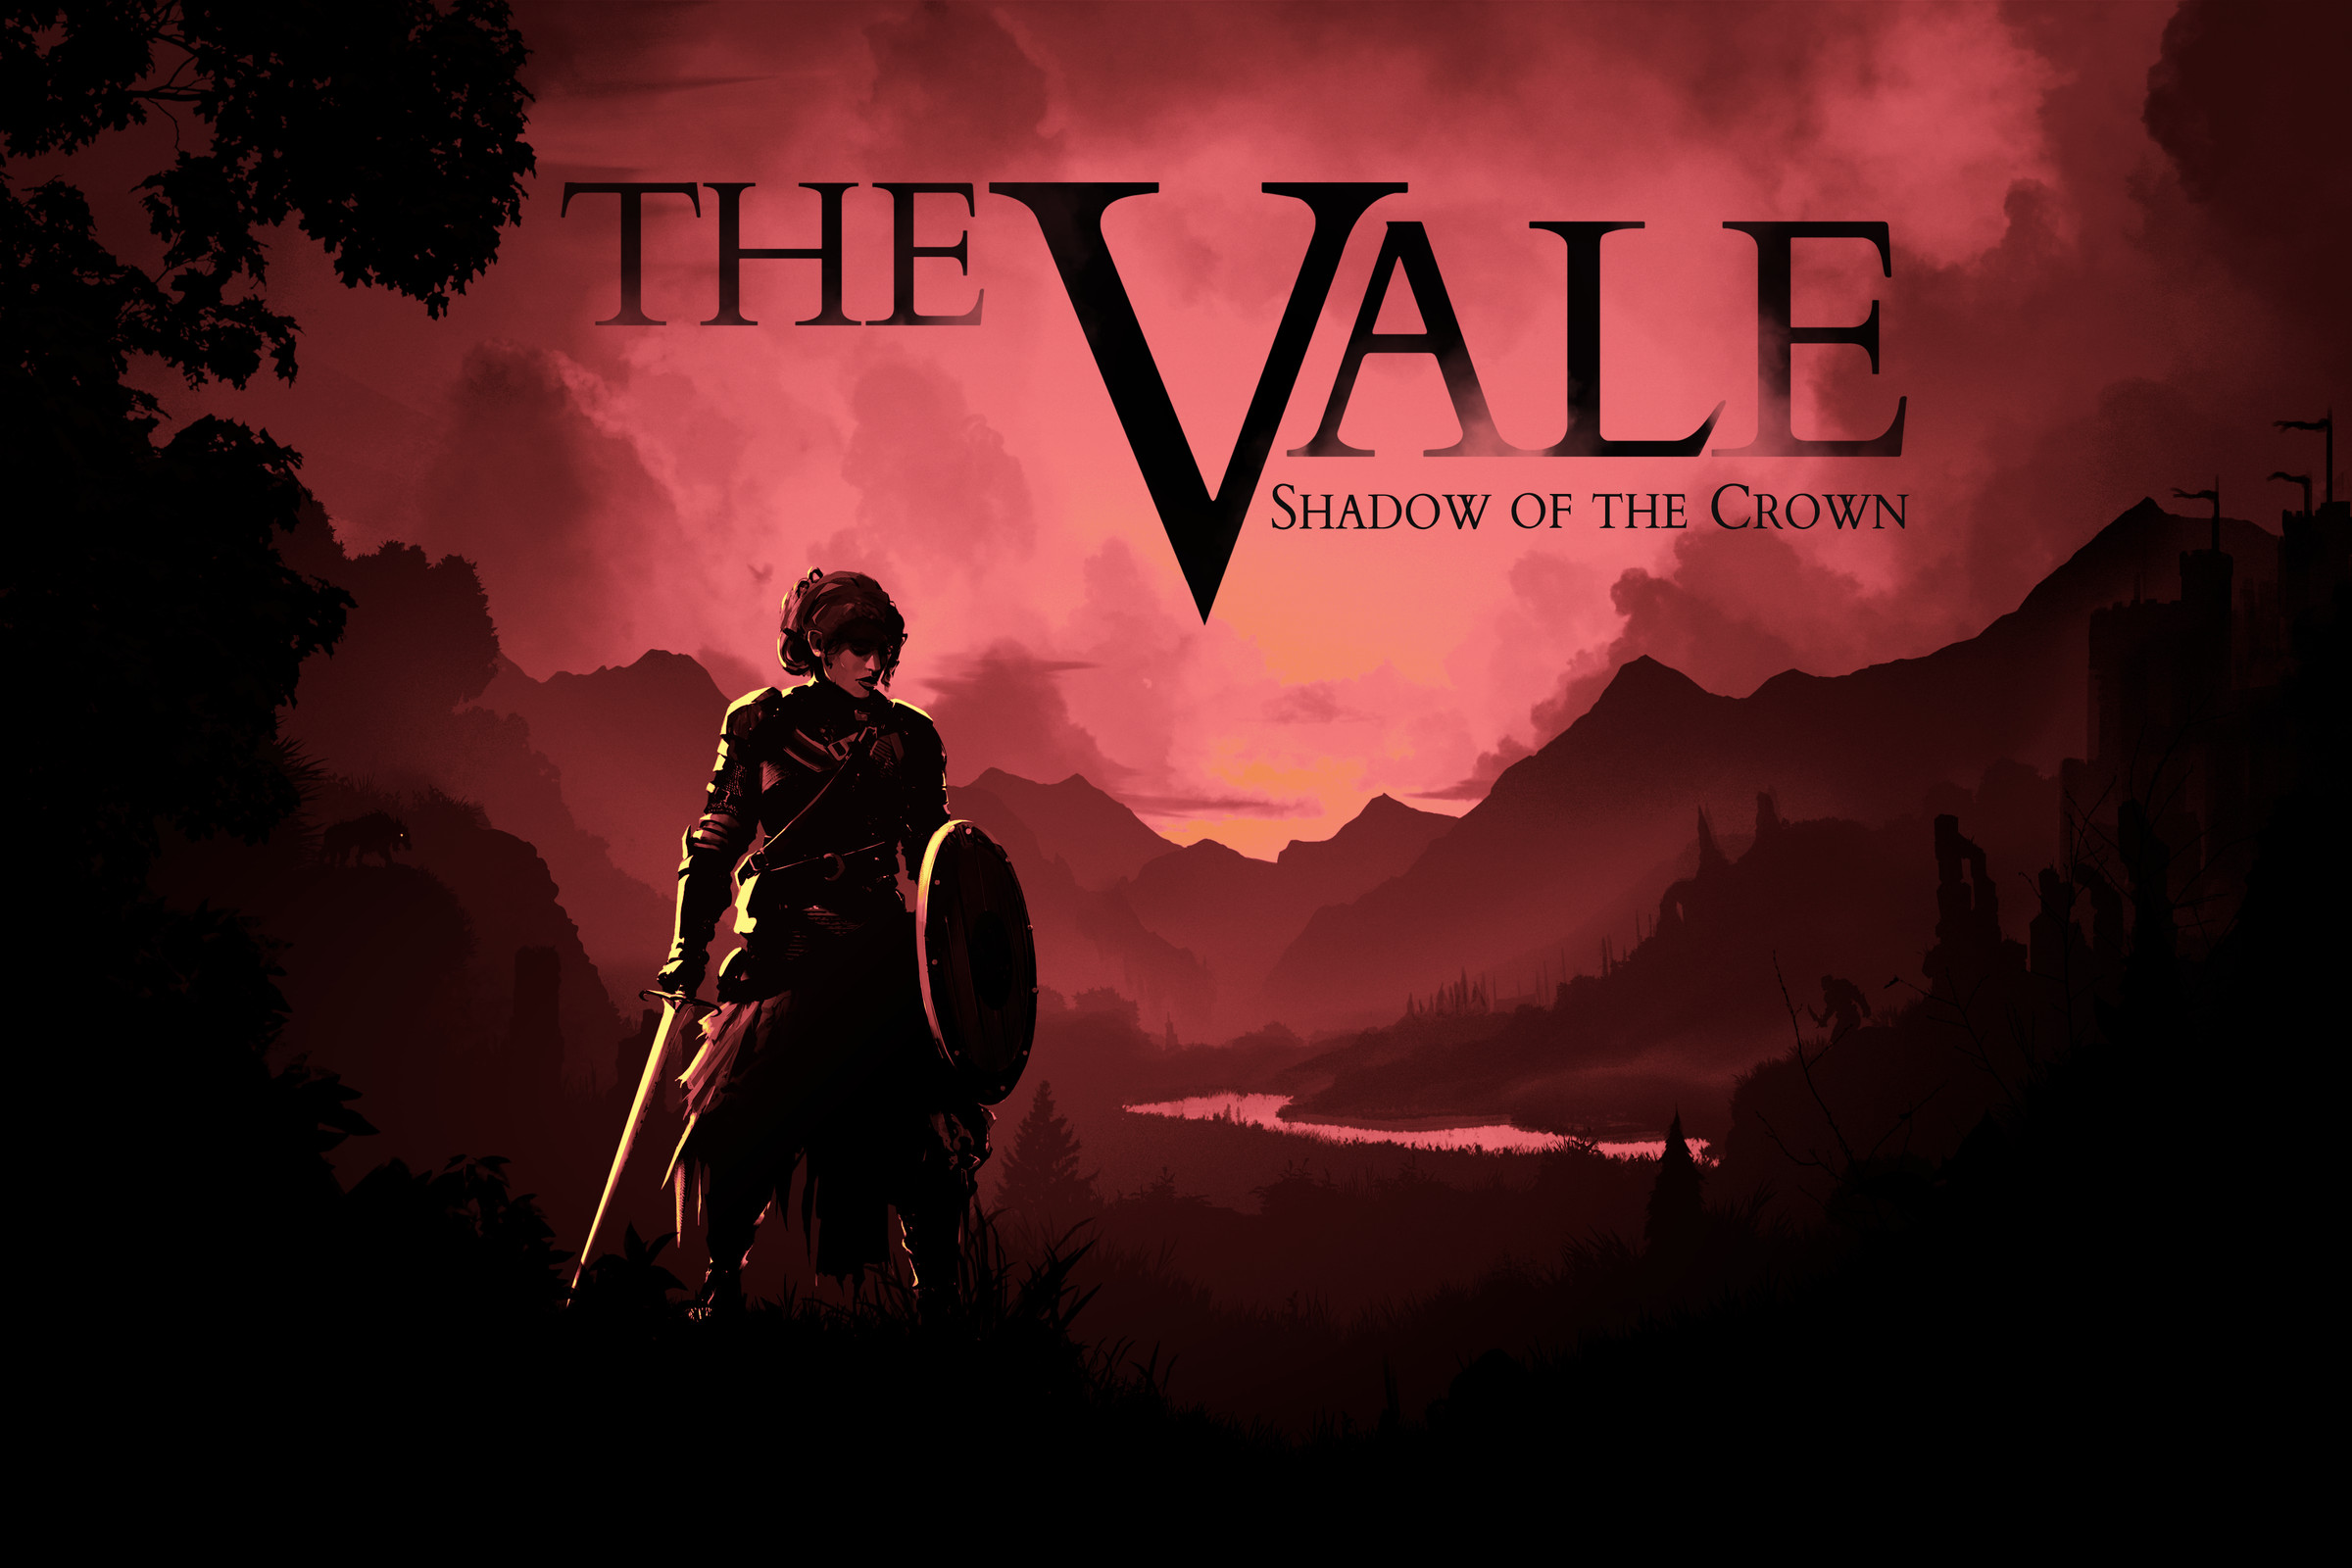 Title screen of The Vale, showing Alex, the player character, holding a sword and shield as she stands in shadow in front of a dark, red-tinted landscape.